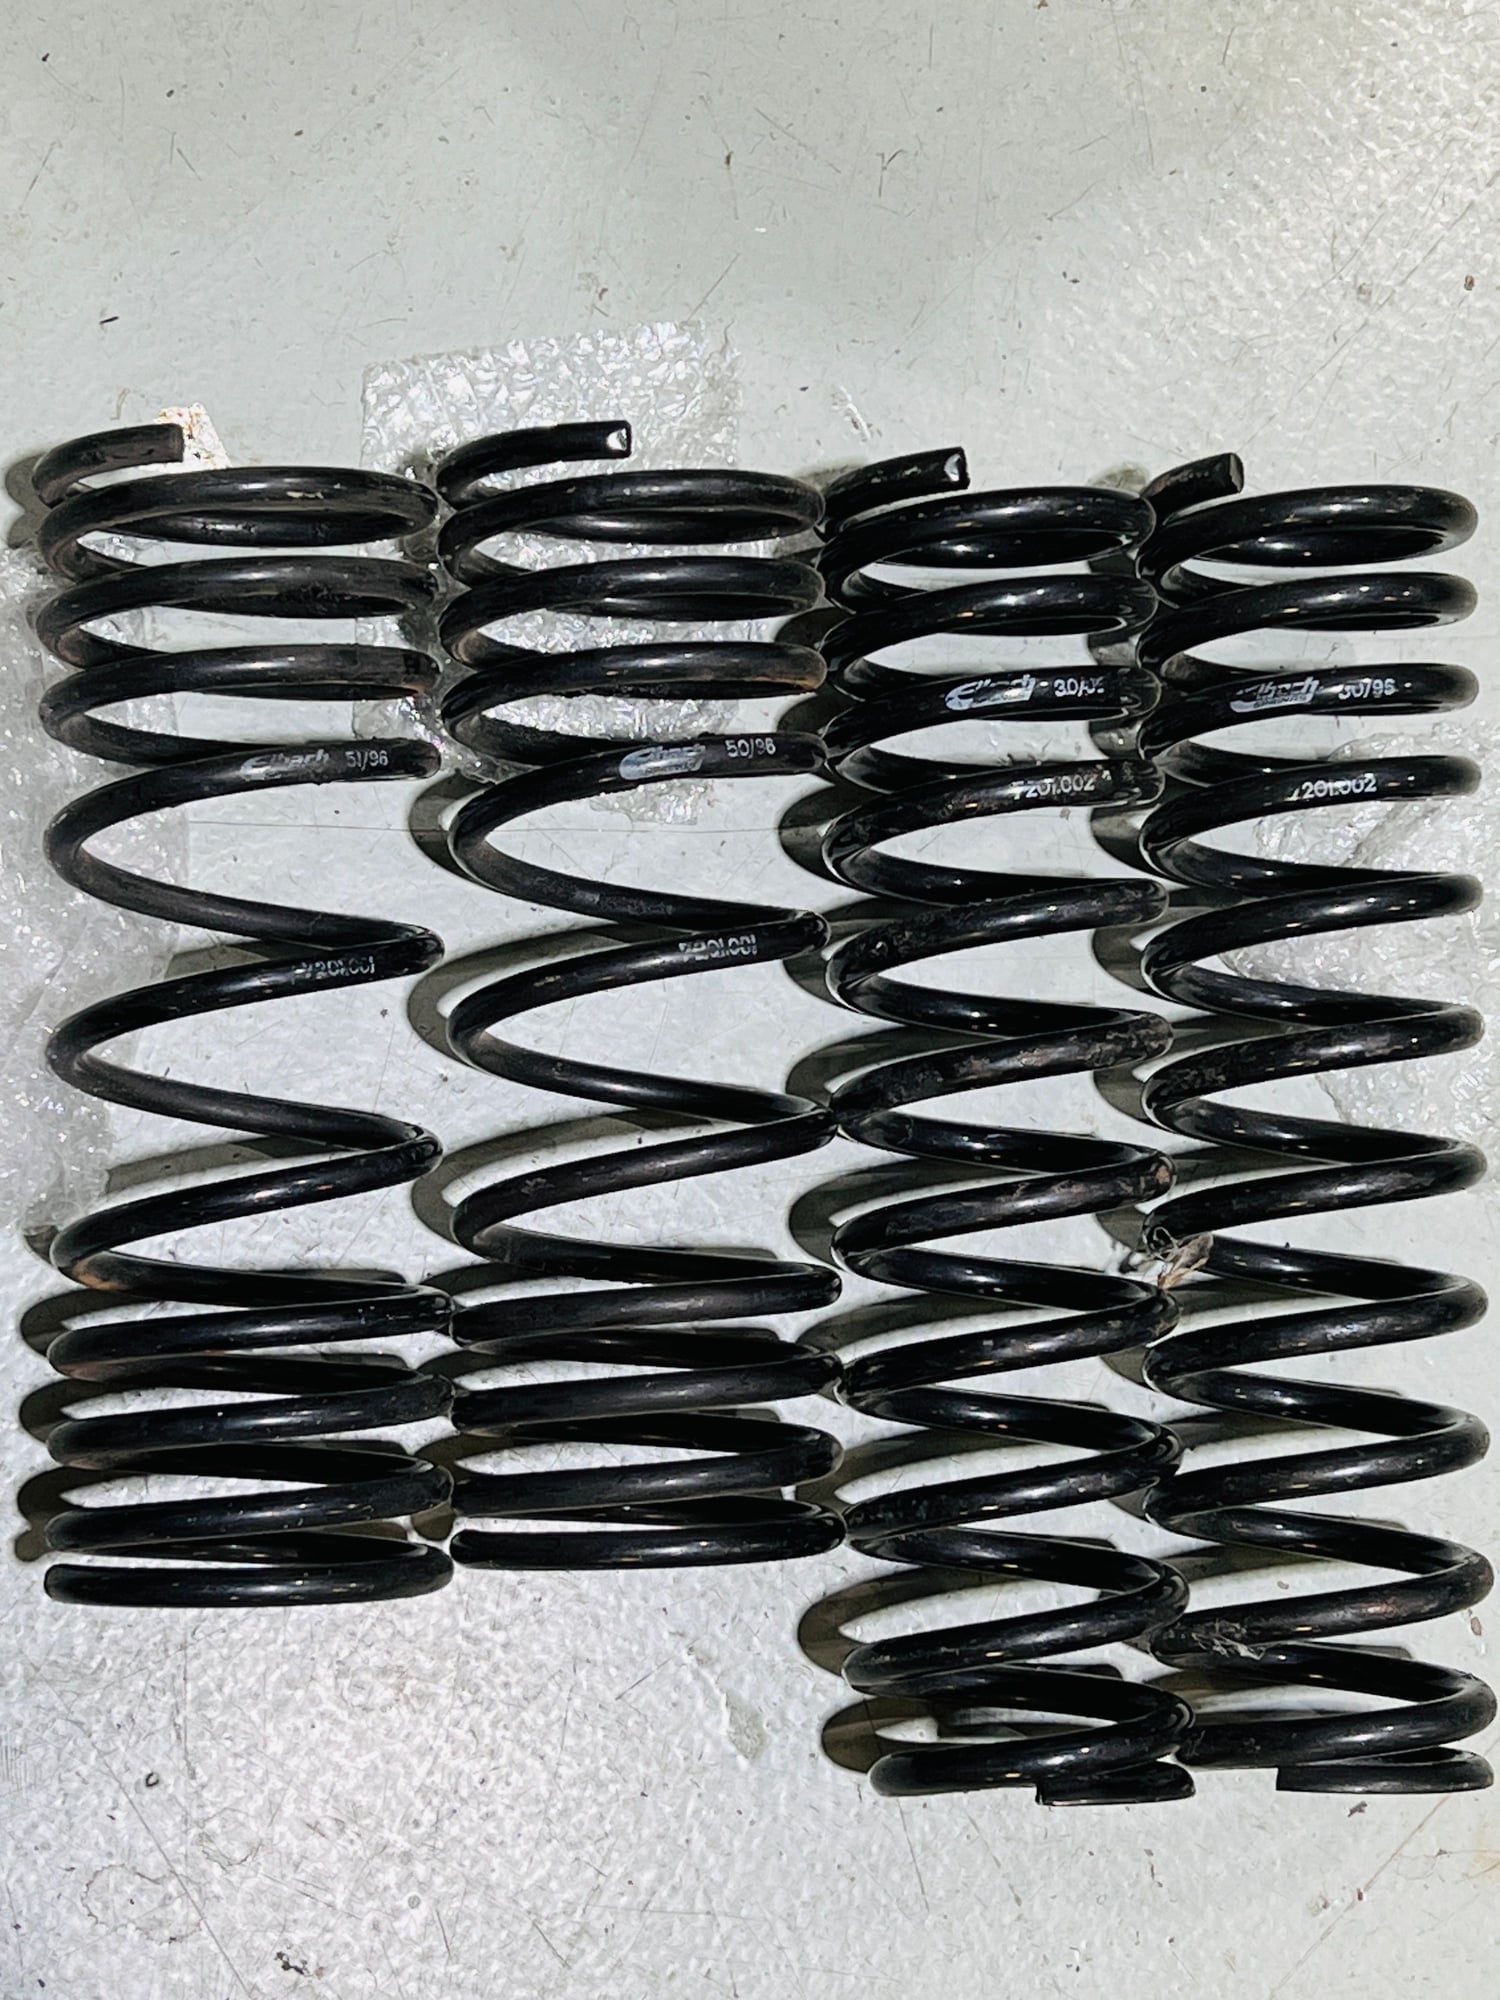 Steering/Suspension - Eibach Pro-Kit Lowering Springs set 964 / 911 from 1990 - 1994 used - Used - 1990 to 1994 Porsche 911 - Houston, TX 77031, United States